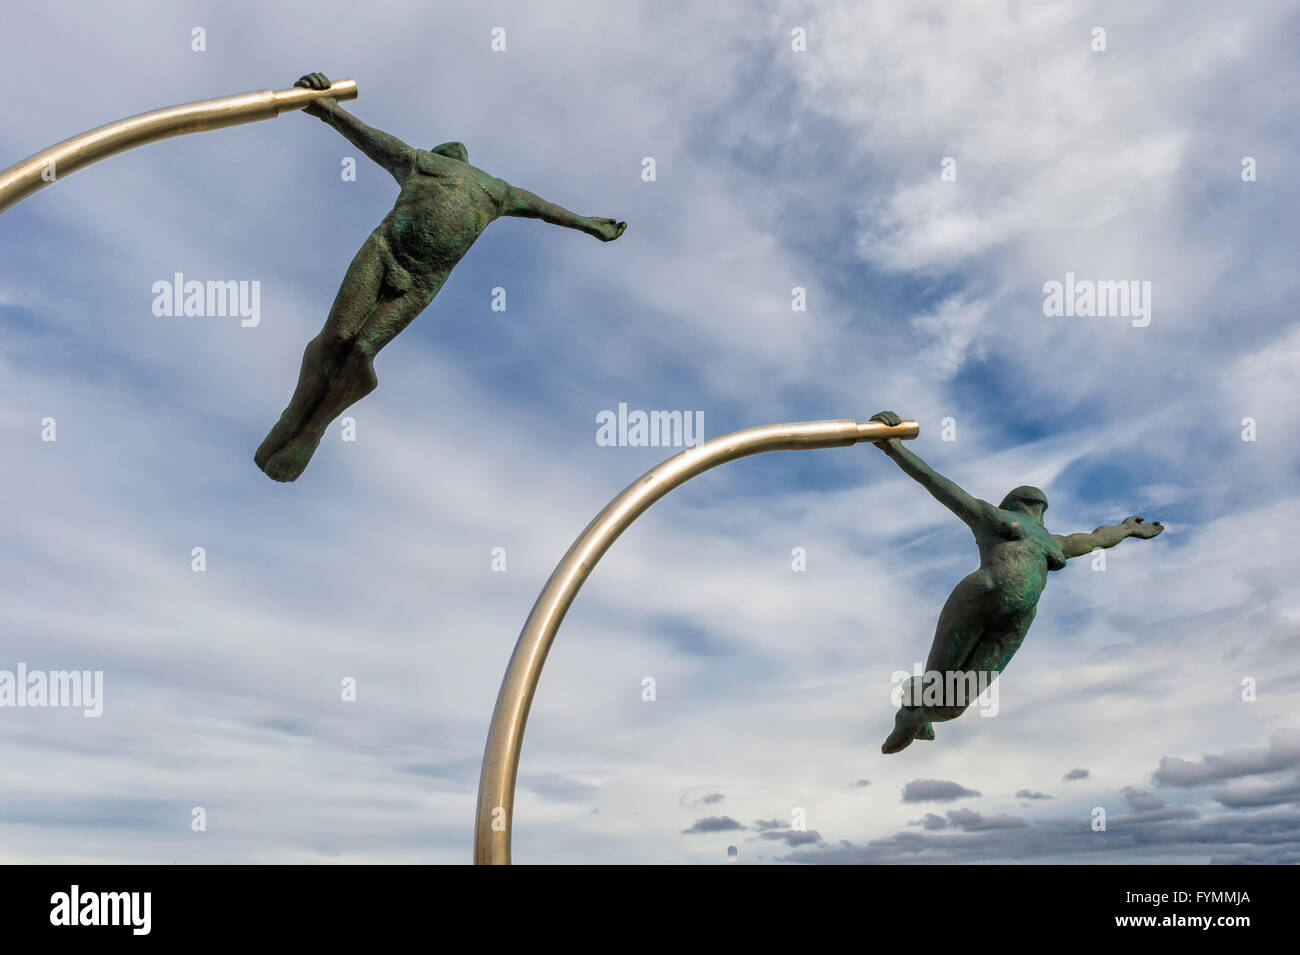 Amor al Viento (Love of the Wind) statue on the waterfront, Puerto Natales, Patagonia, Chile Stock Photo